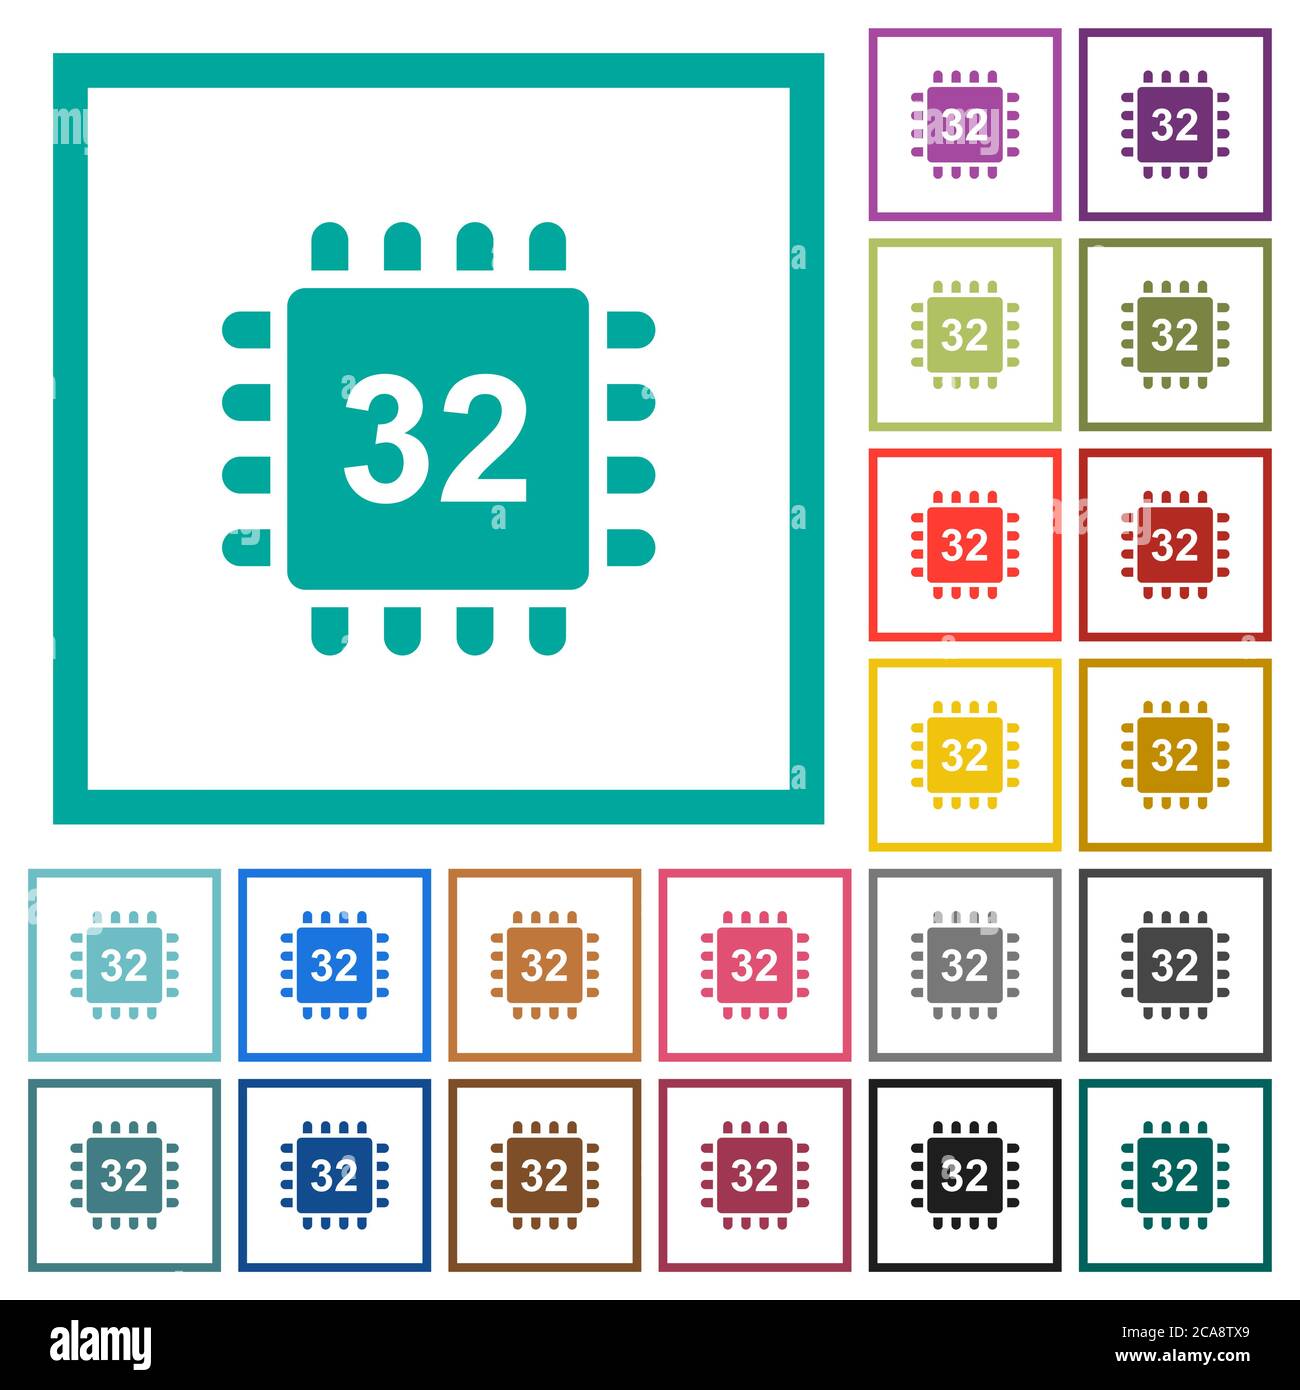 Microprocessor 32 bit architecture flat color icons with quadrant frames on white background Stock Vector